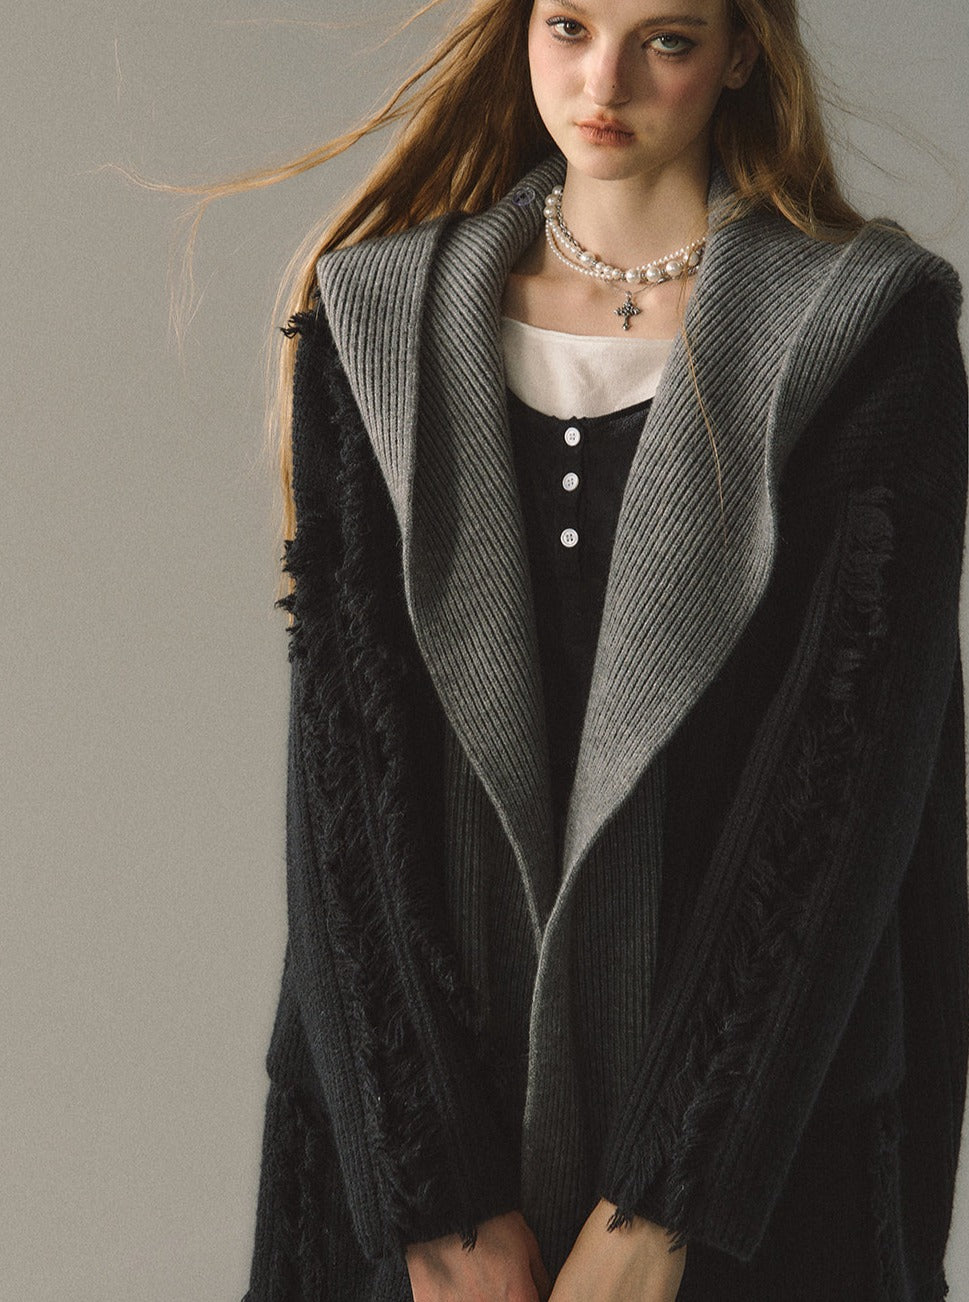 Hooded knitted cardigan jacket